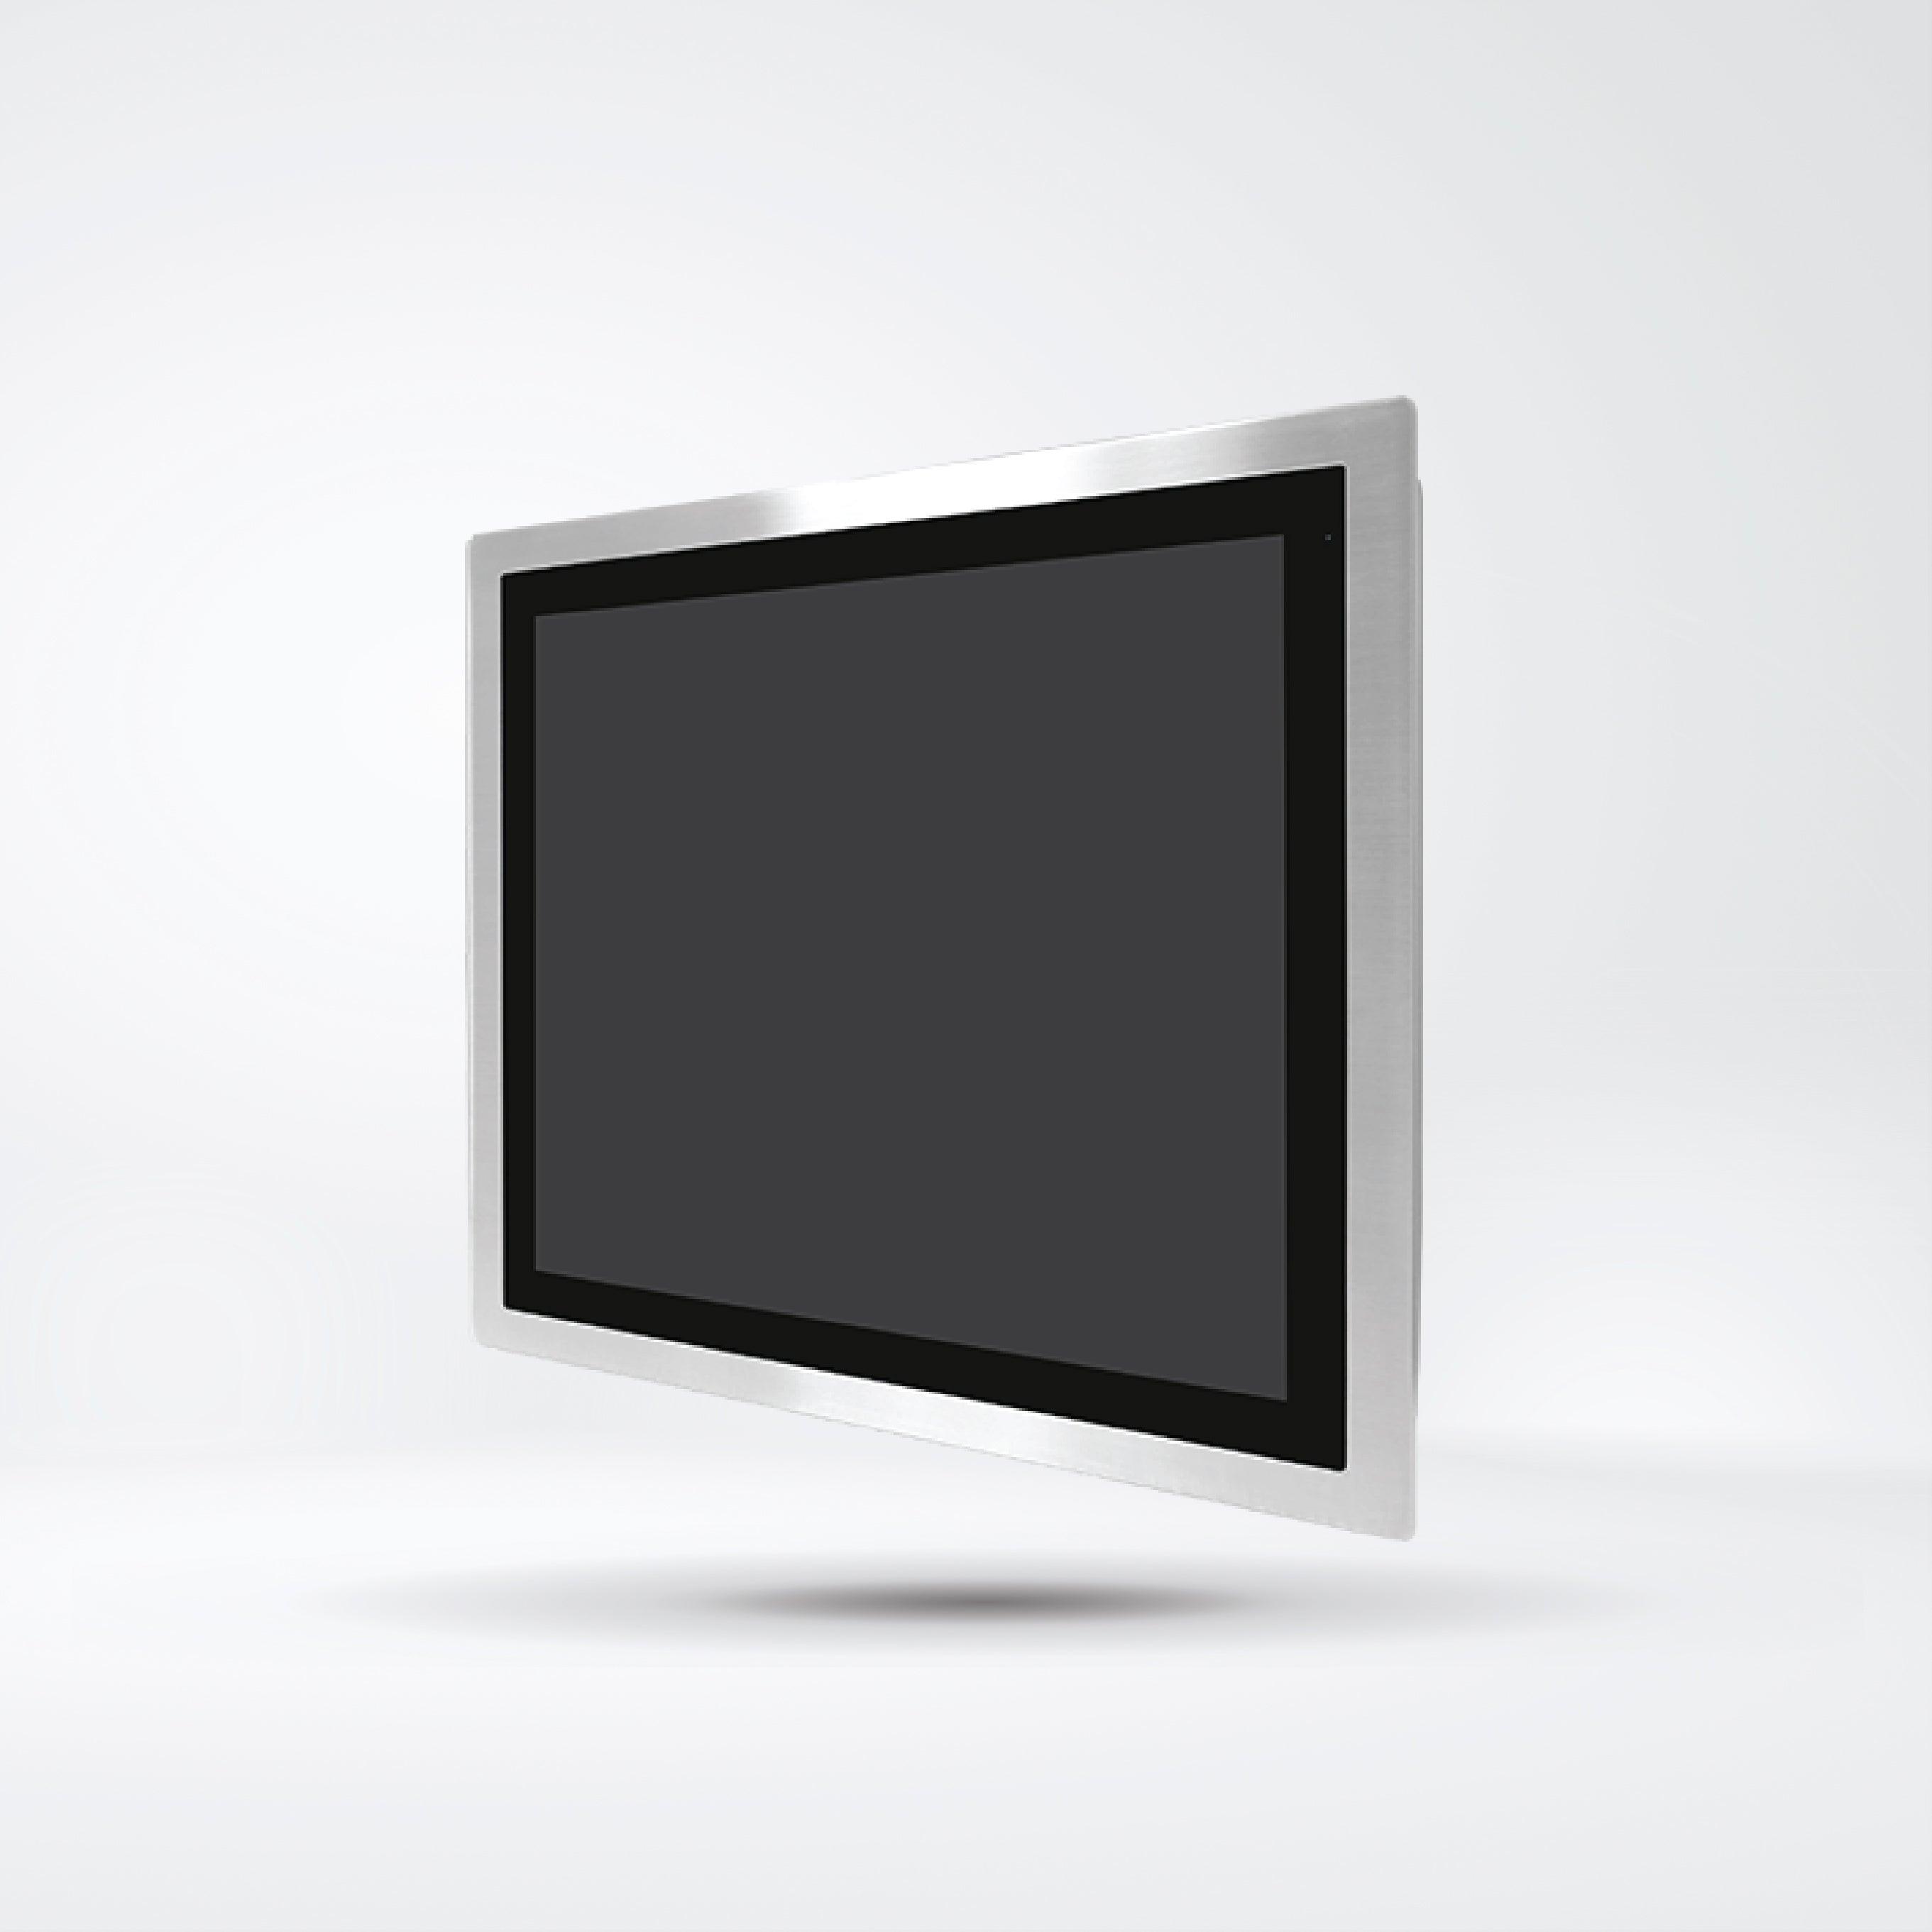 FABS-119RH 19” Flat Front Panel IP66 Stainless Chassis Display - Riverplus